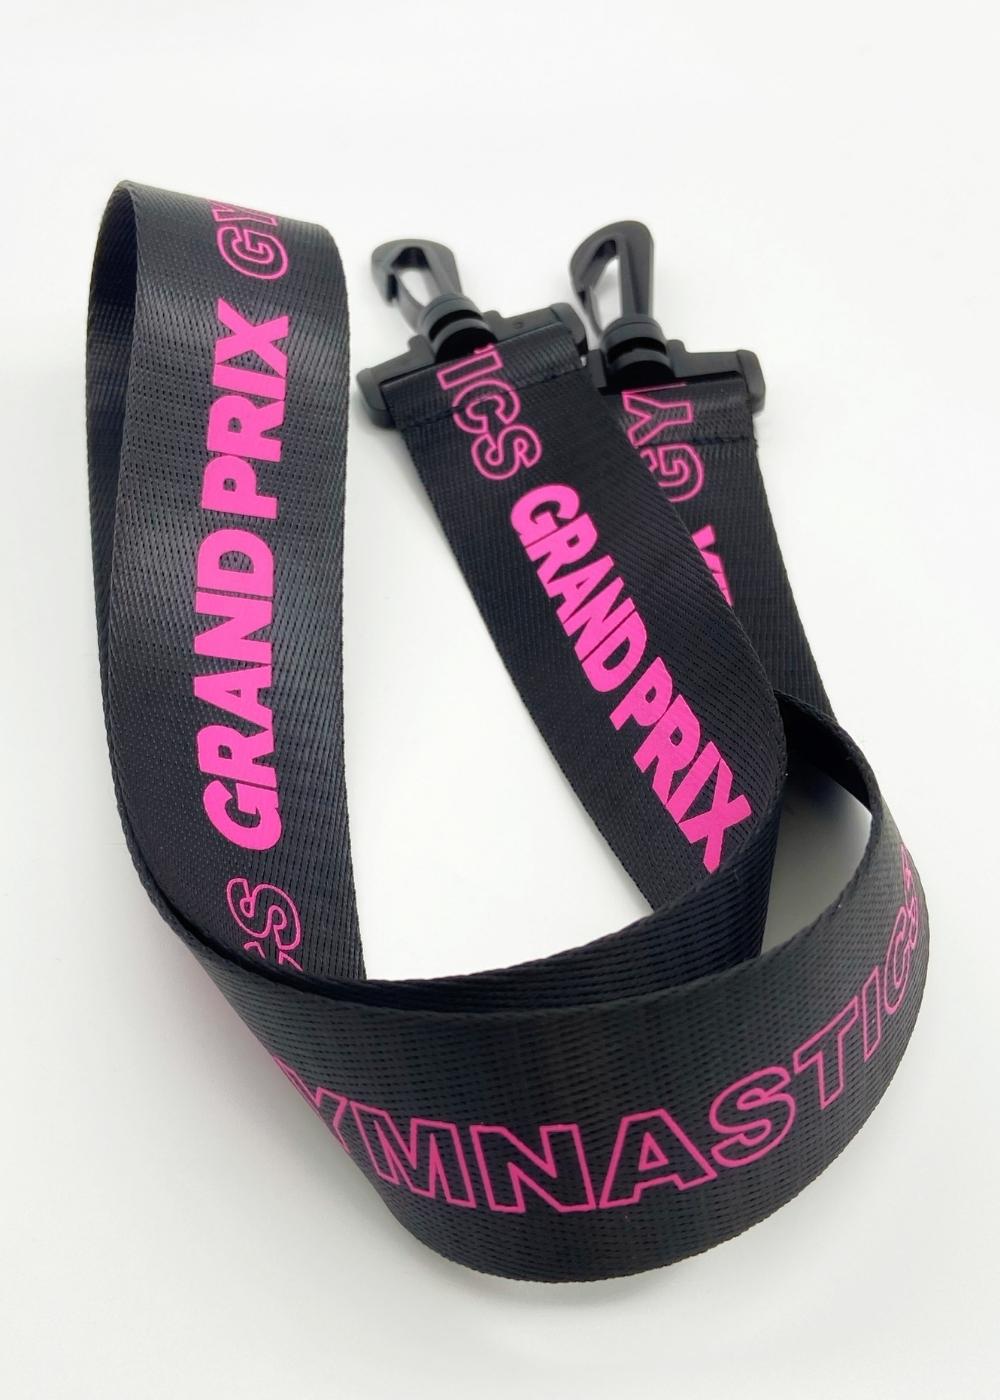 Belt for covers by Grand Prix